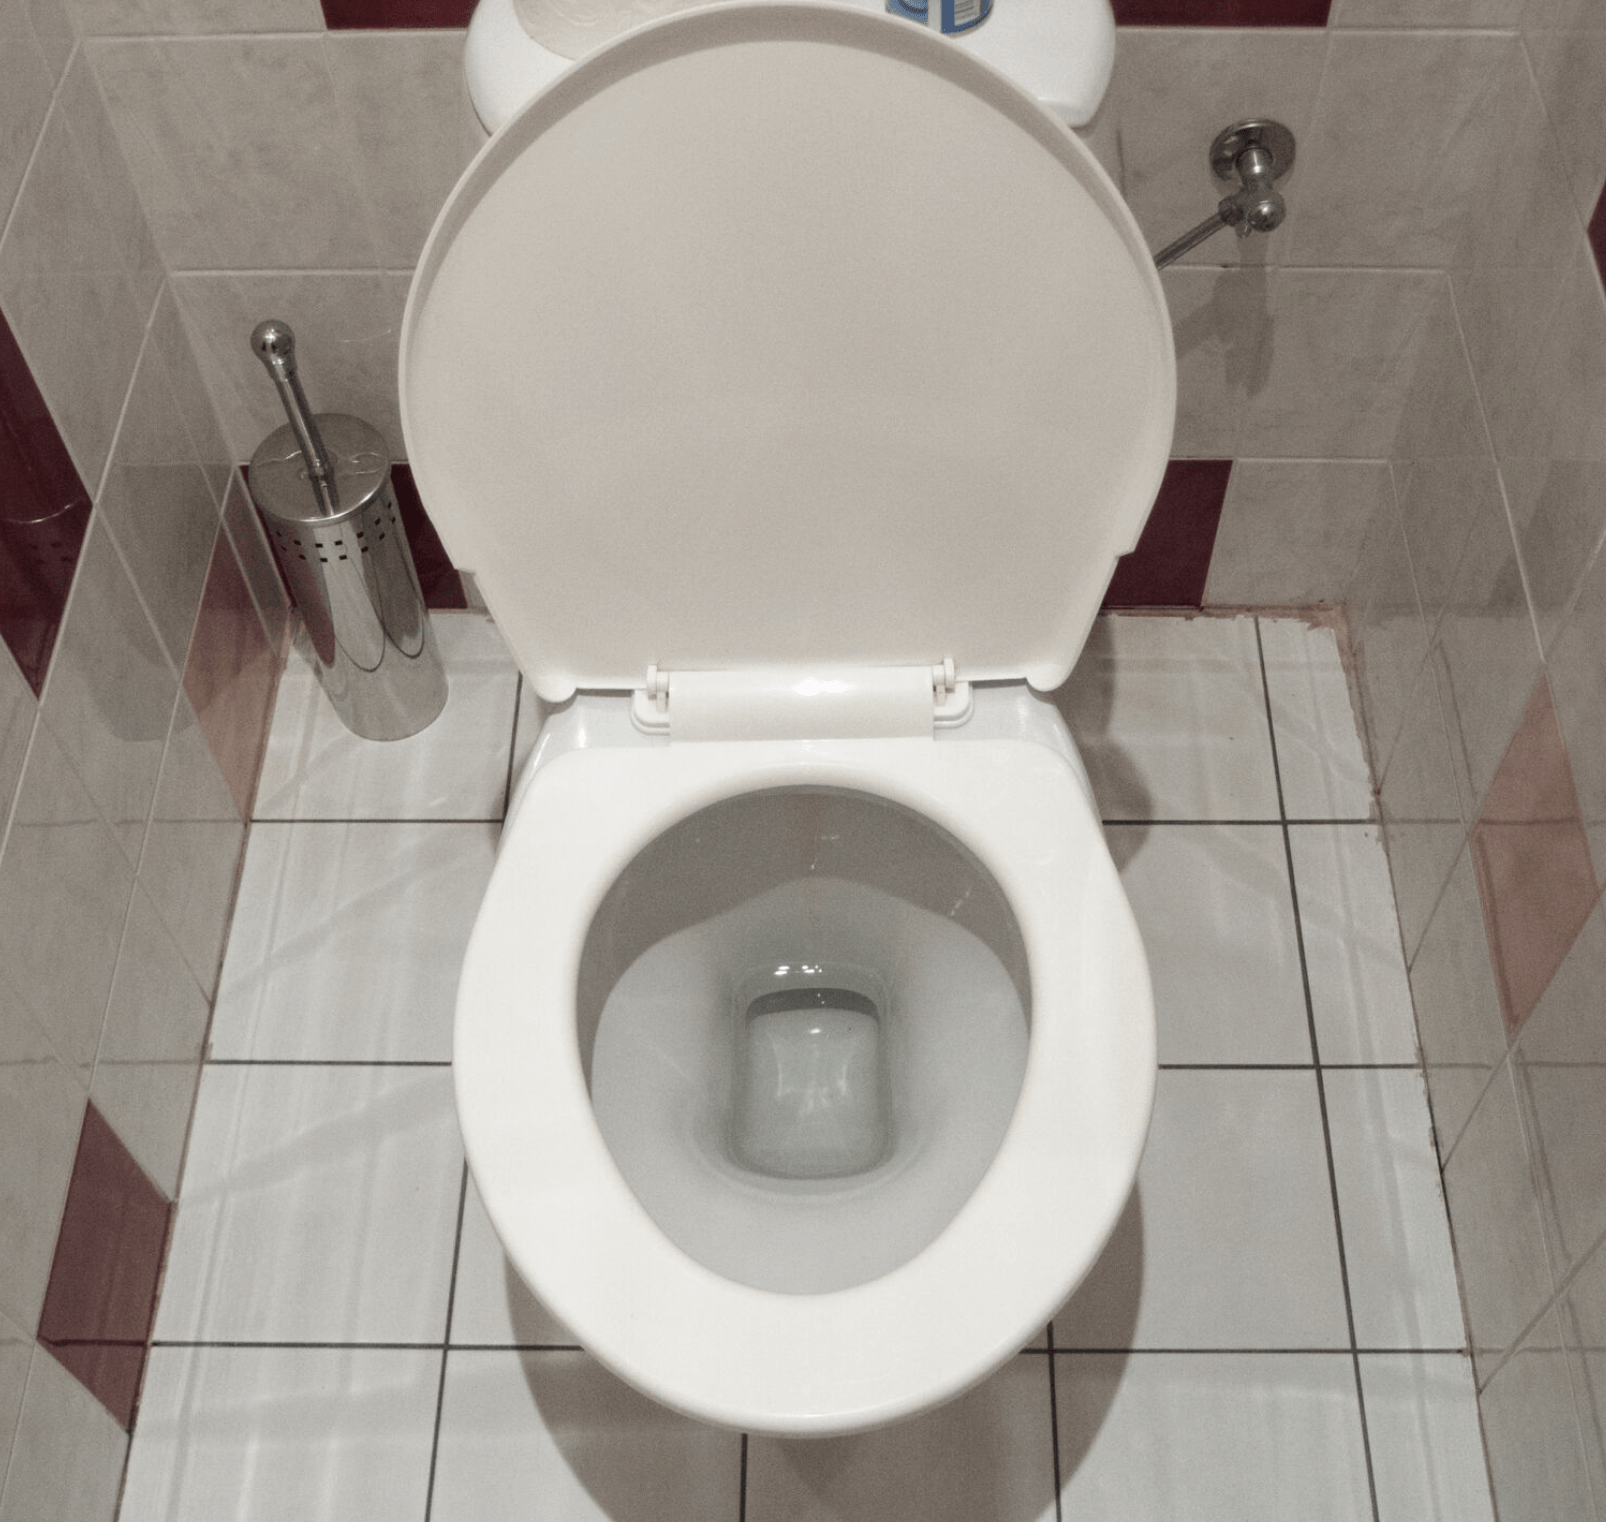 Toilet with open lid